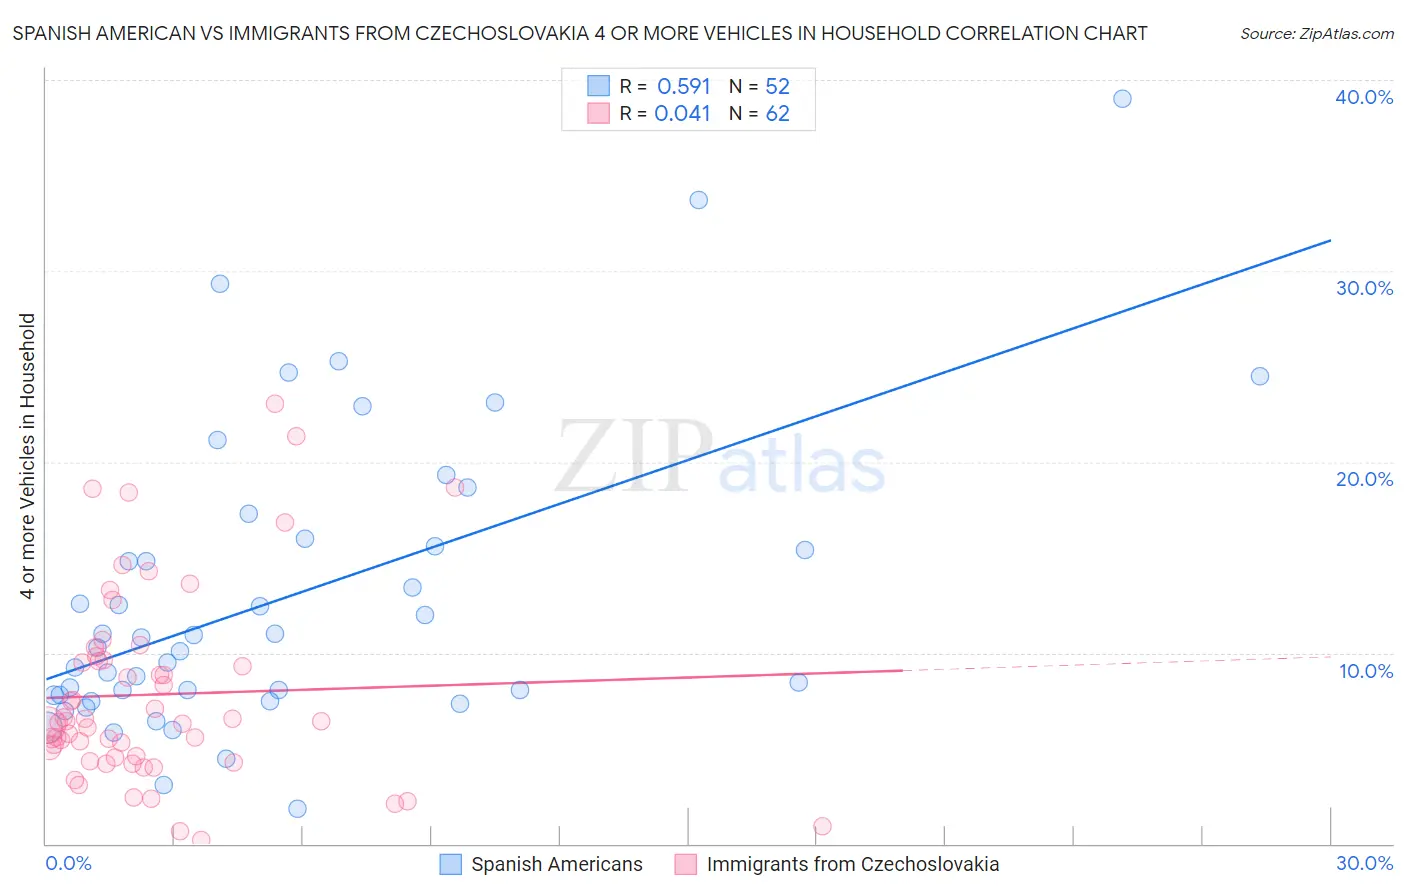 Spanish American vs Immigrants from Czechoslovakia 4 or more Vehicles in Household